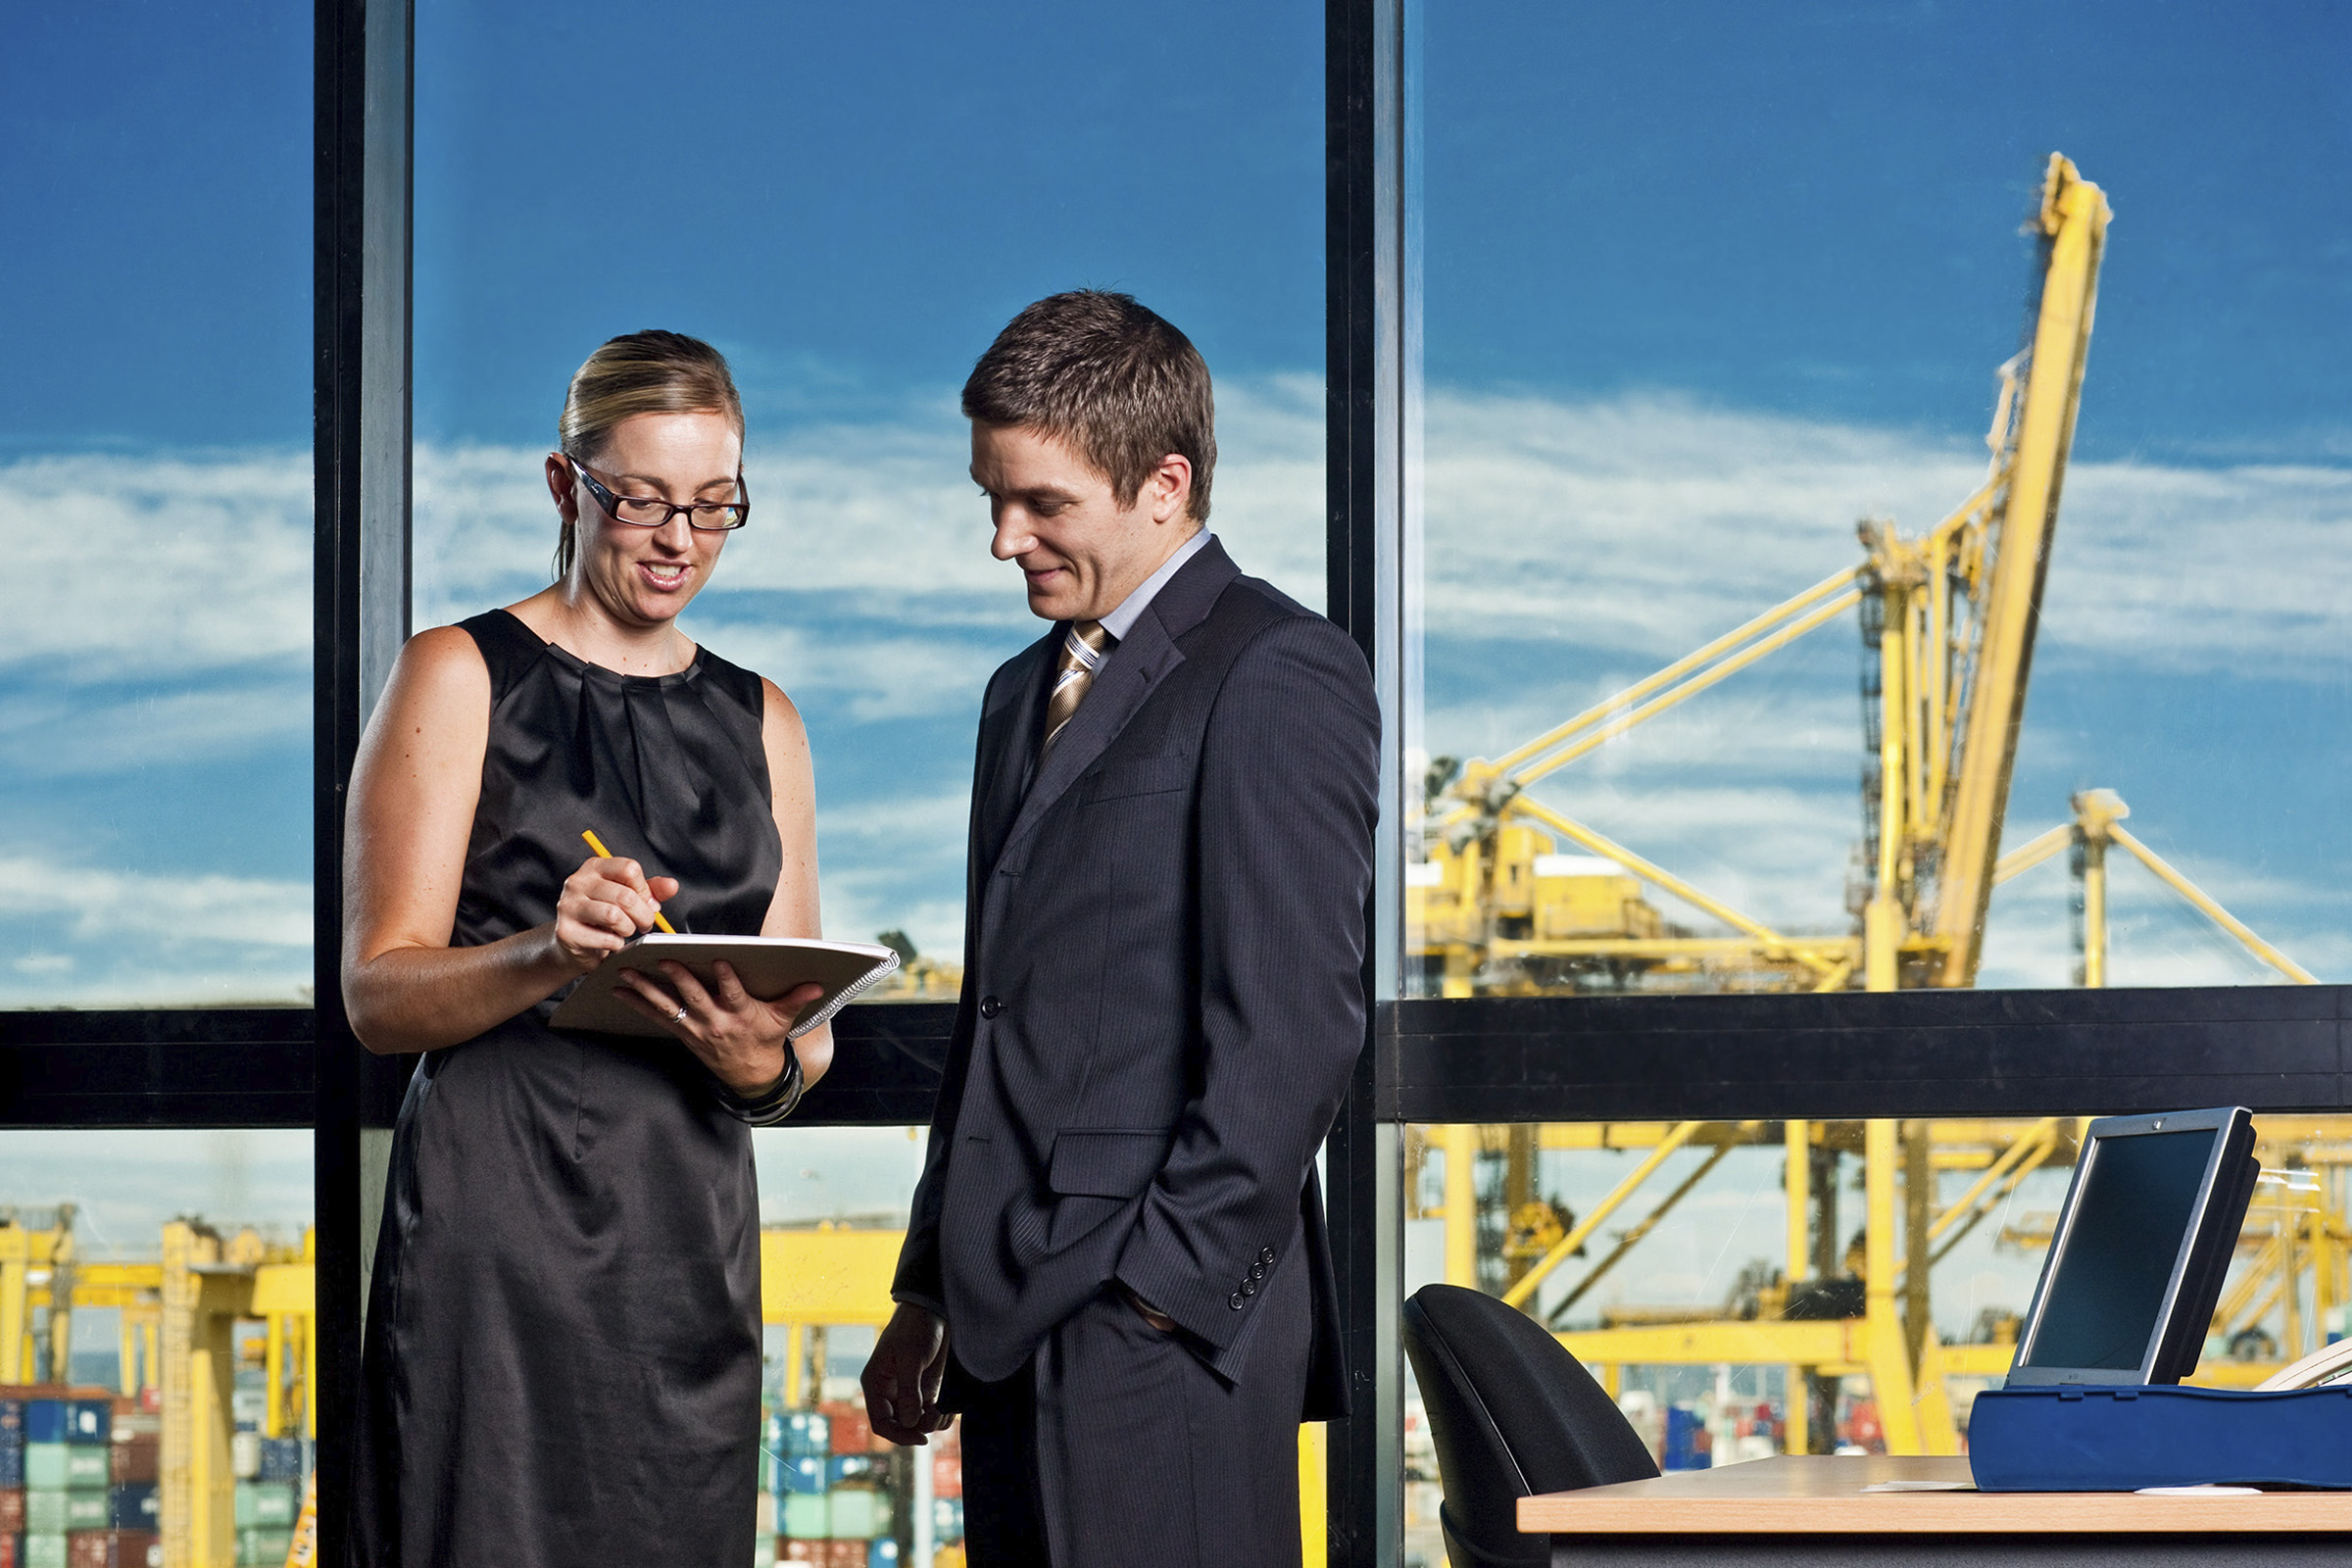 Corporate editorial location Annual Report photography VISA Global male & female Port Botany background